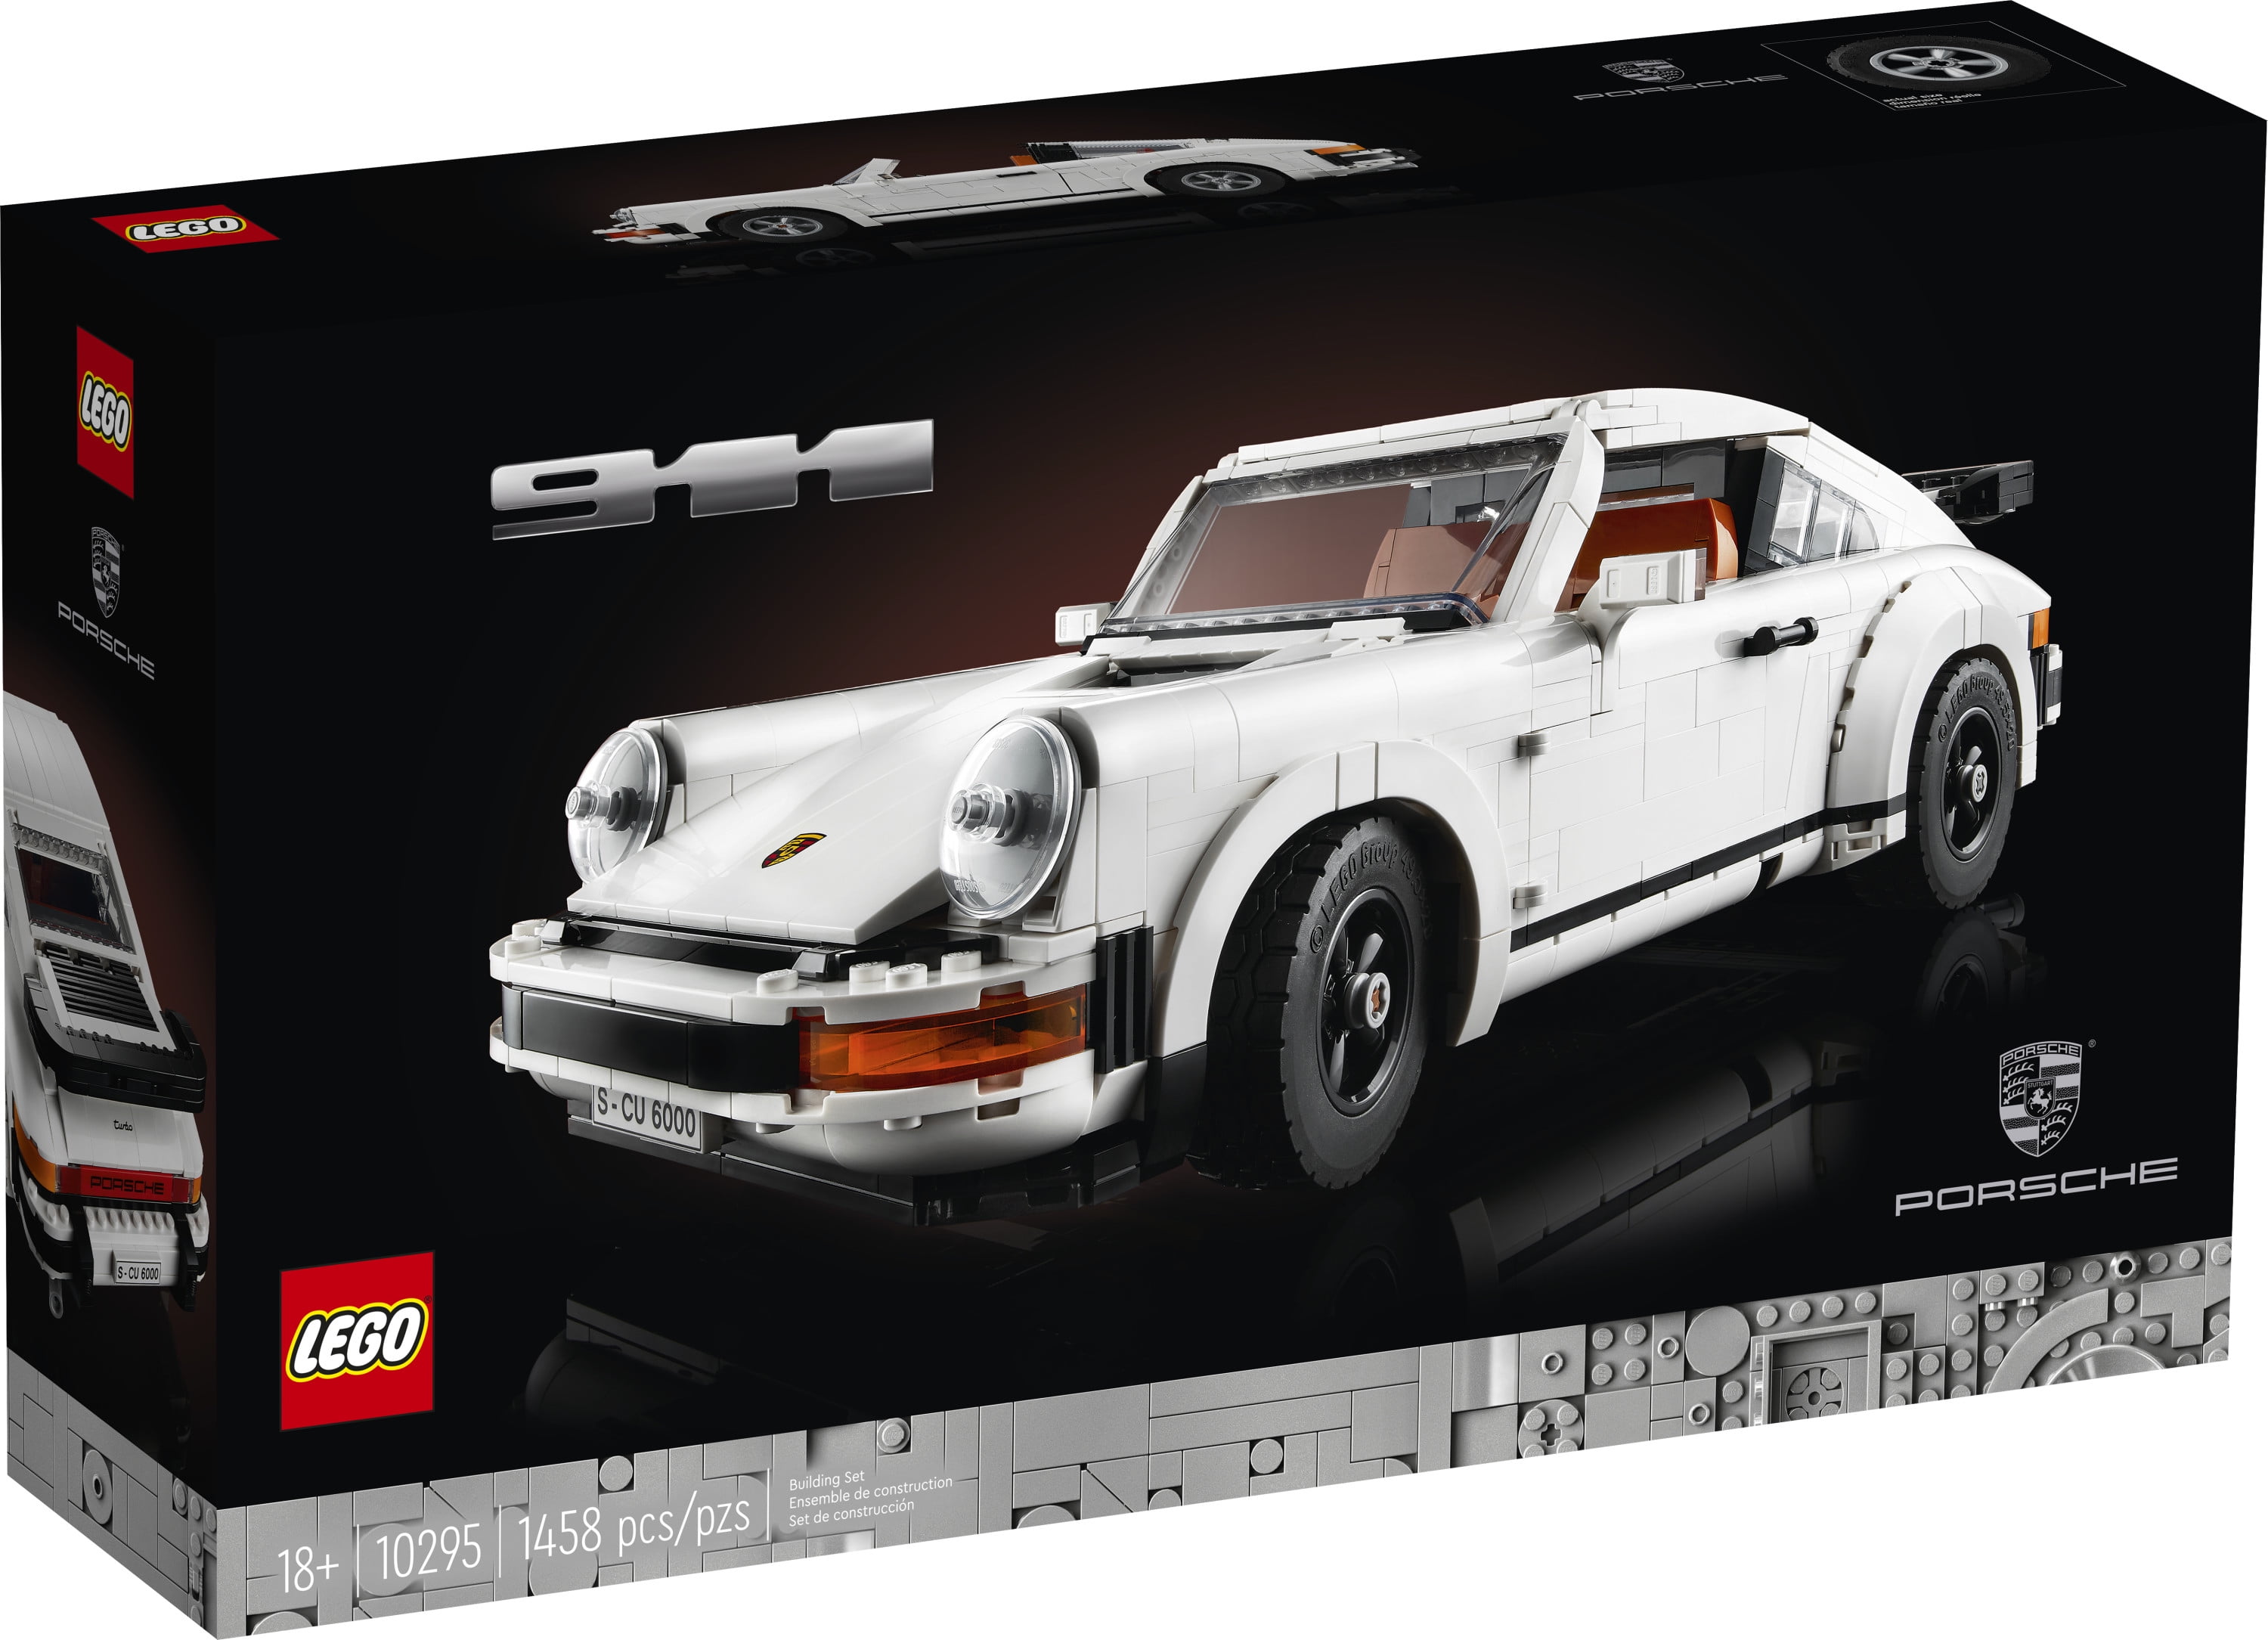 mytologi bølge resident LEGO Icons Porsche 911 10295, Collectible Turbo Targa Model Car Building  Kit, 2in1 Porsche Race Car Set for Adults and Teens to Build, Gift Idea -  Walmart.com